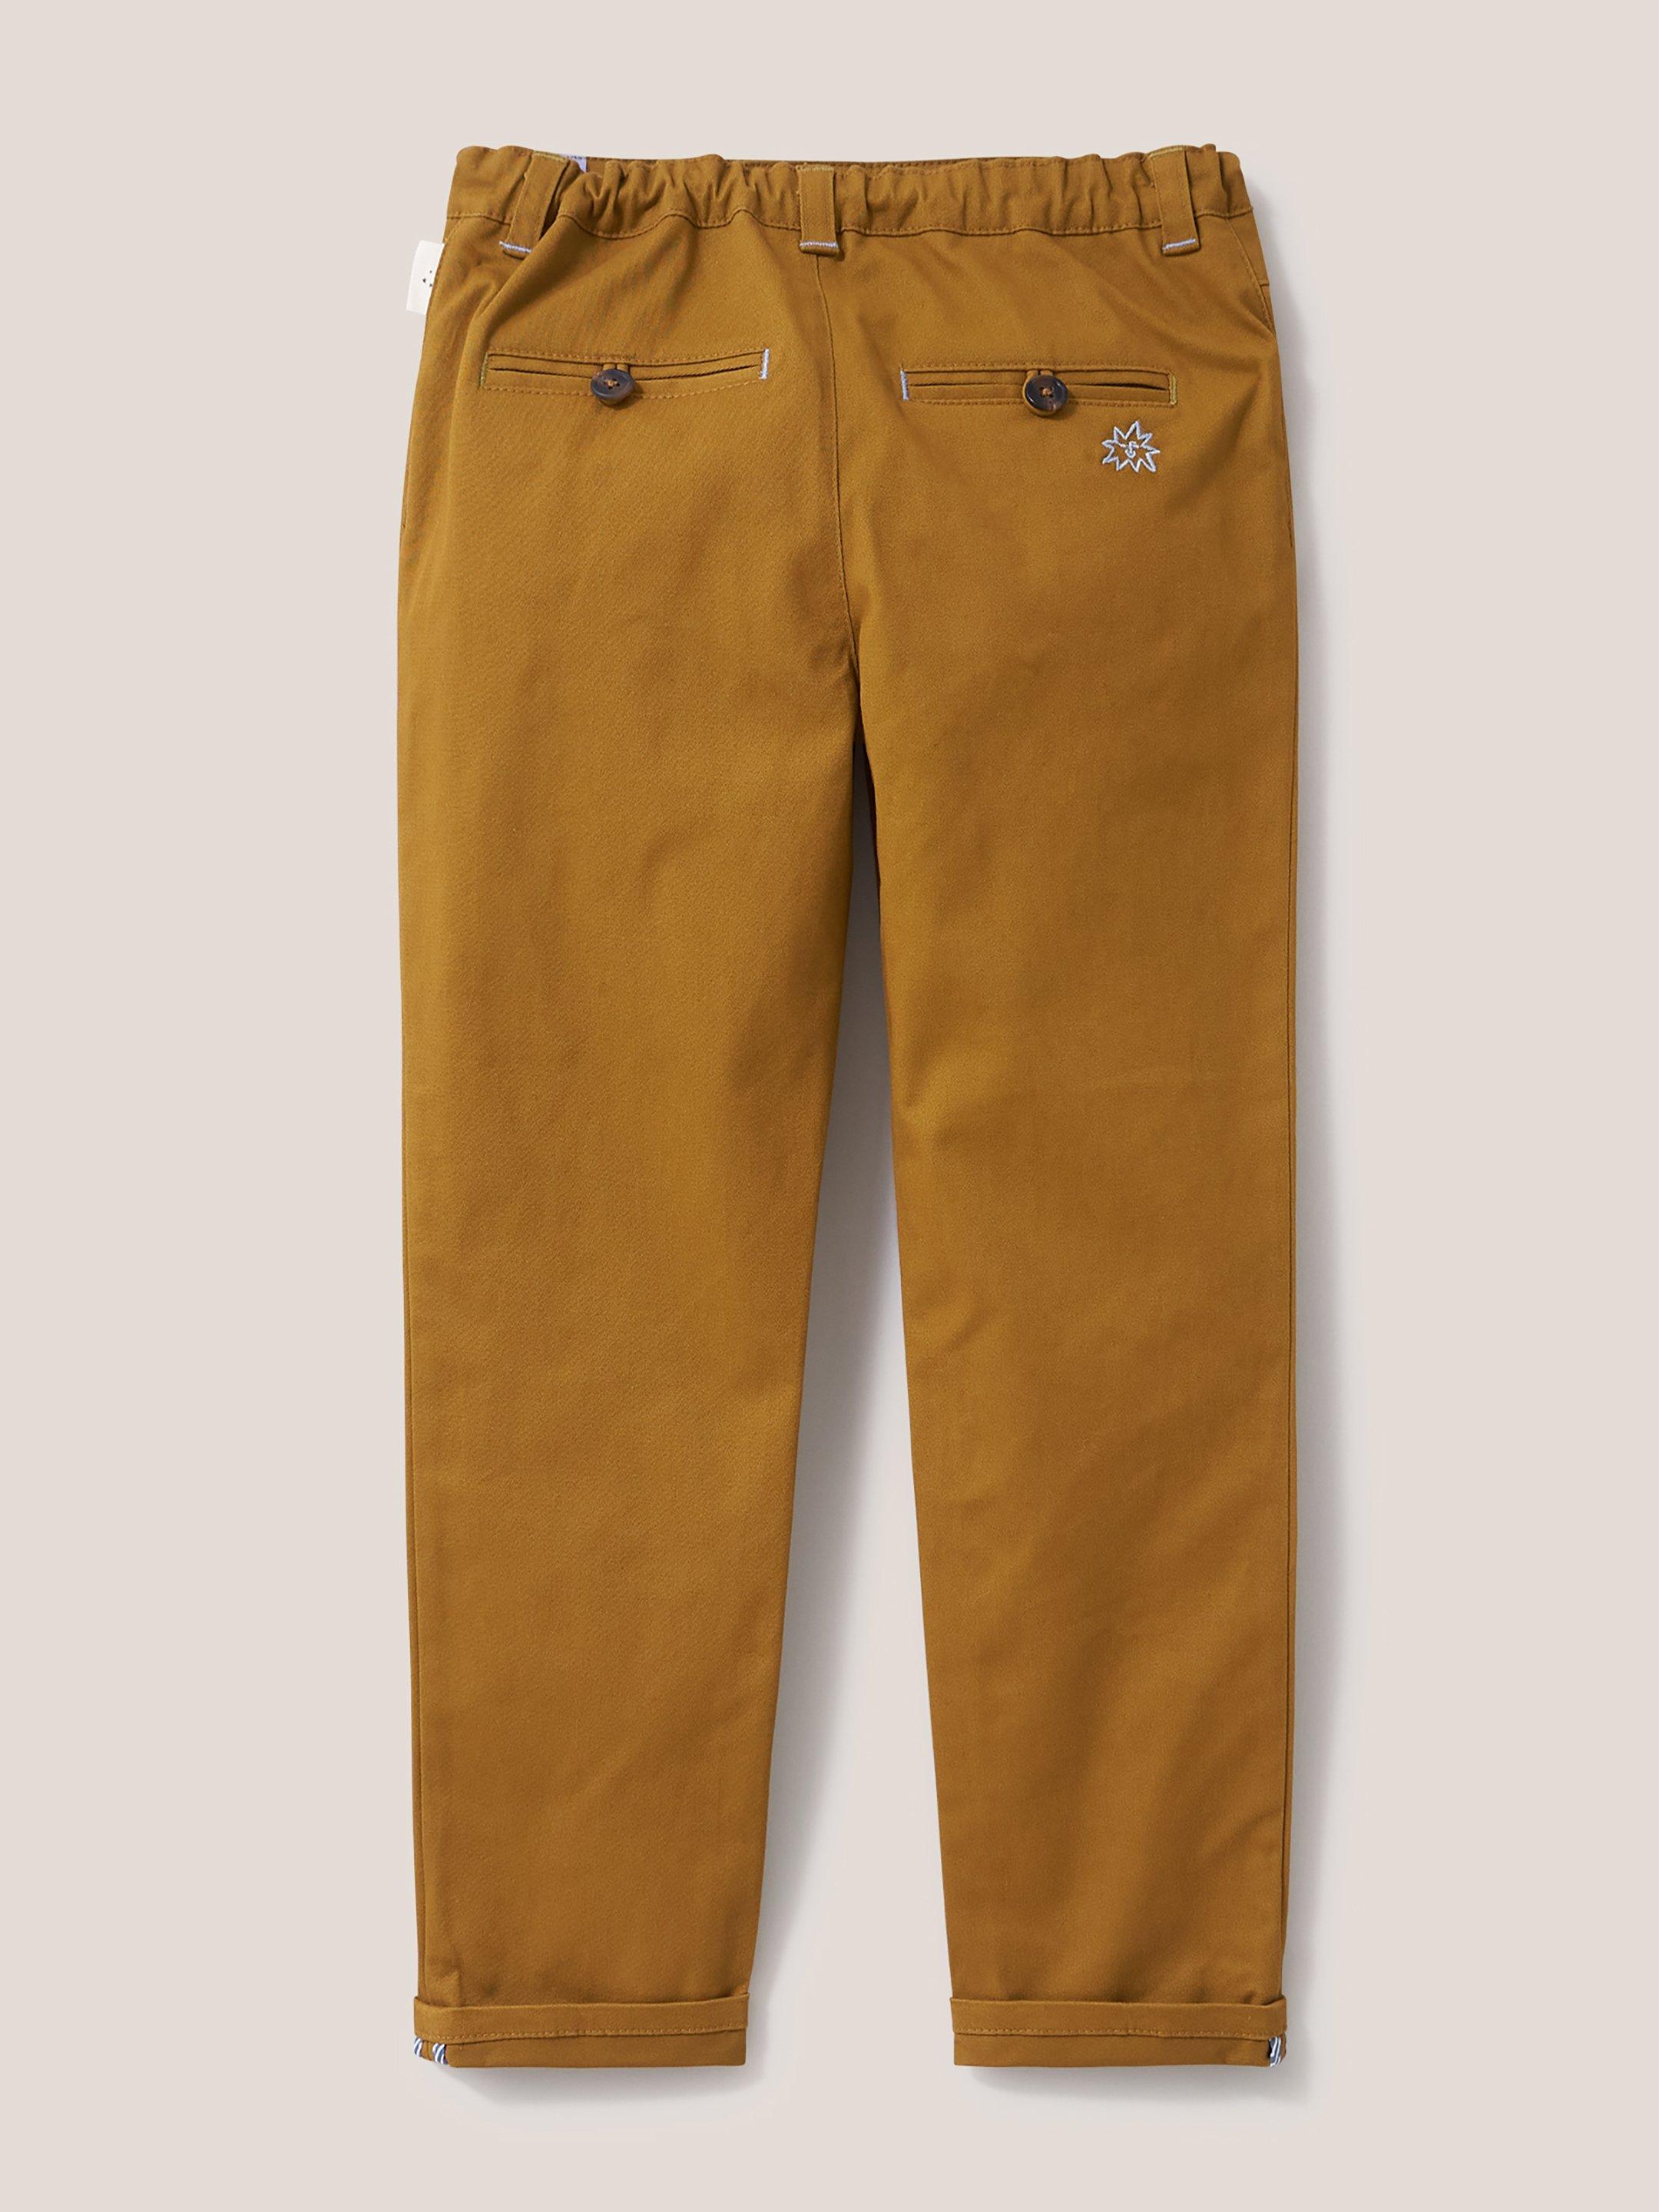 Cole Chino Trouser in DK NAT - FLAT BACK